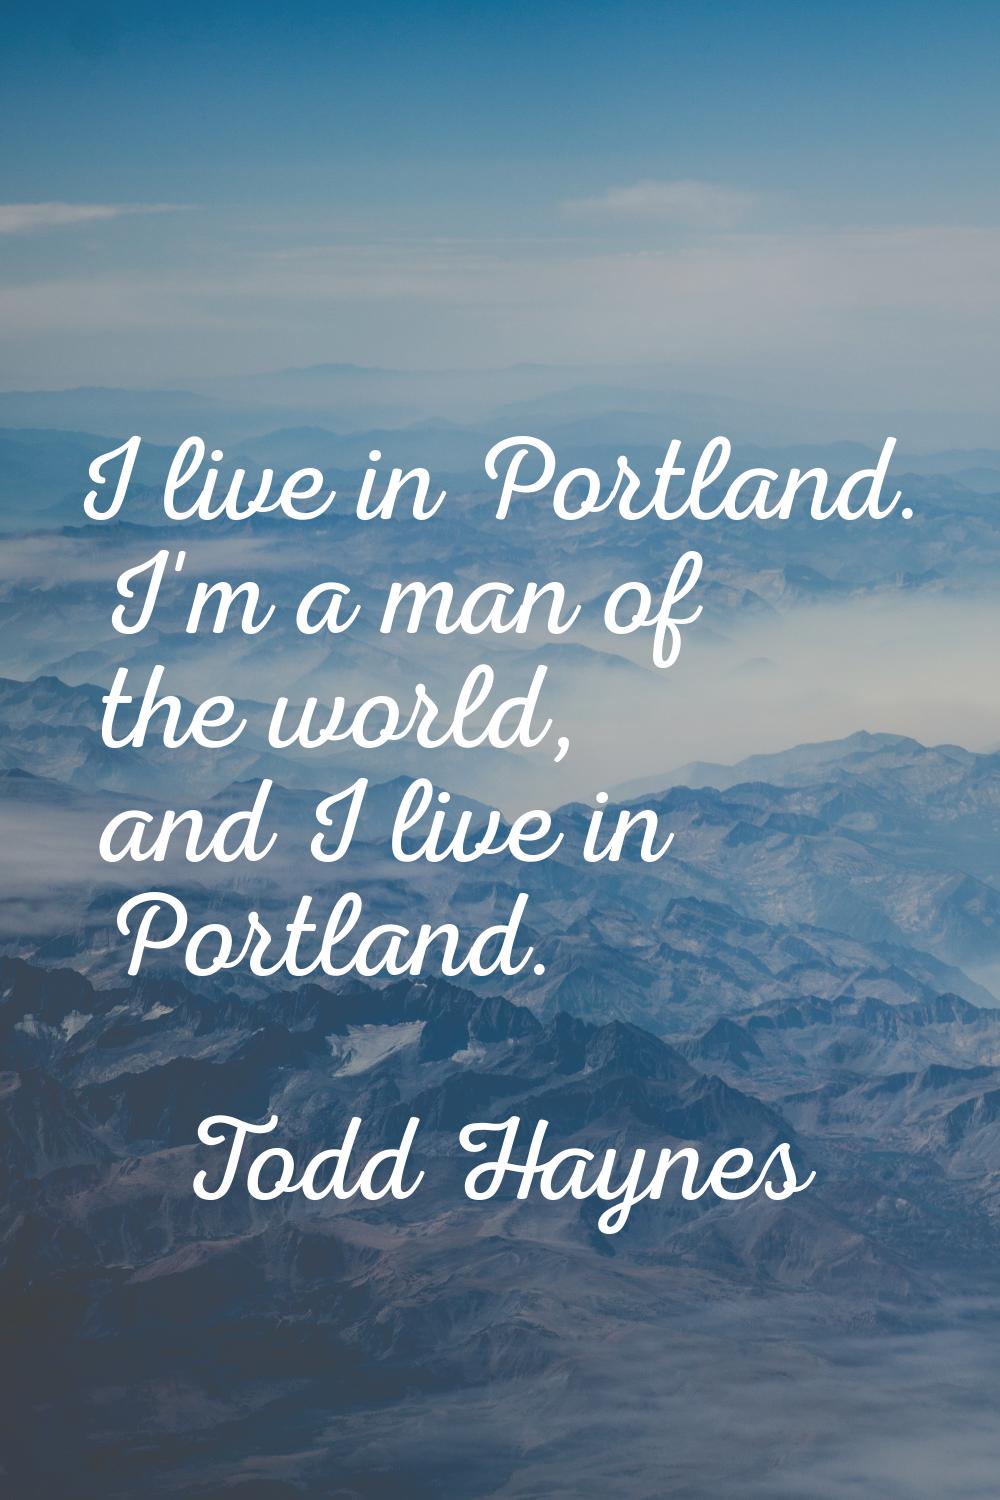 I live in Portland. I'm a man of the world, and I live in Portland.